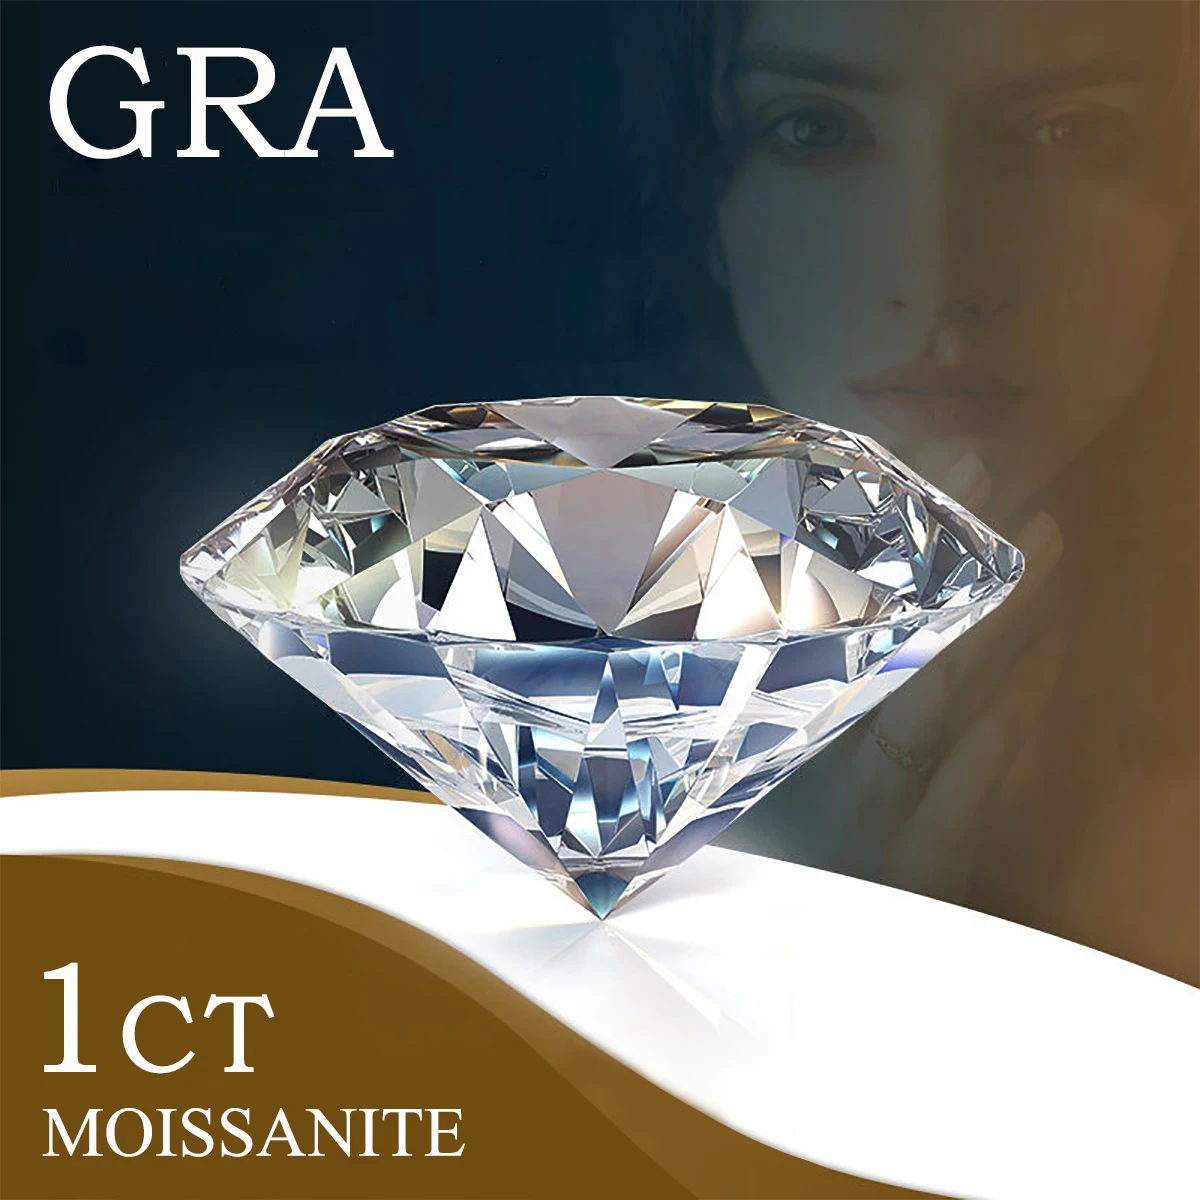 Real Gems Moissanite Loose Stones Gemstones 3mm To 12mm D Color VVS1 Round Diamonds Excellent Cut Pass Diamond Test Dropshipping